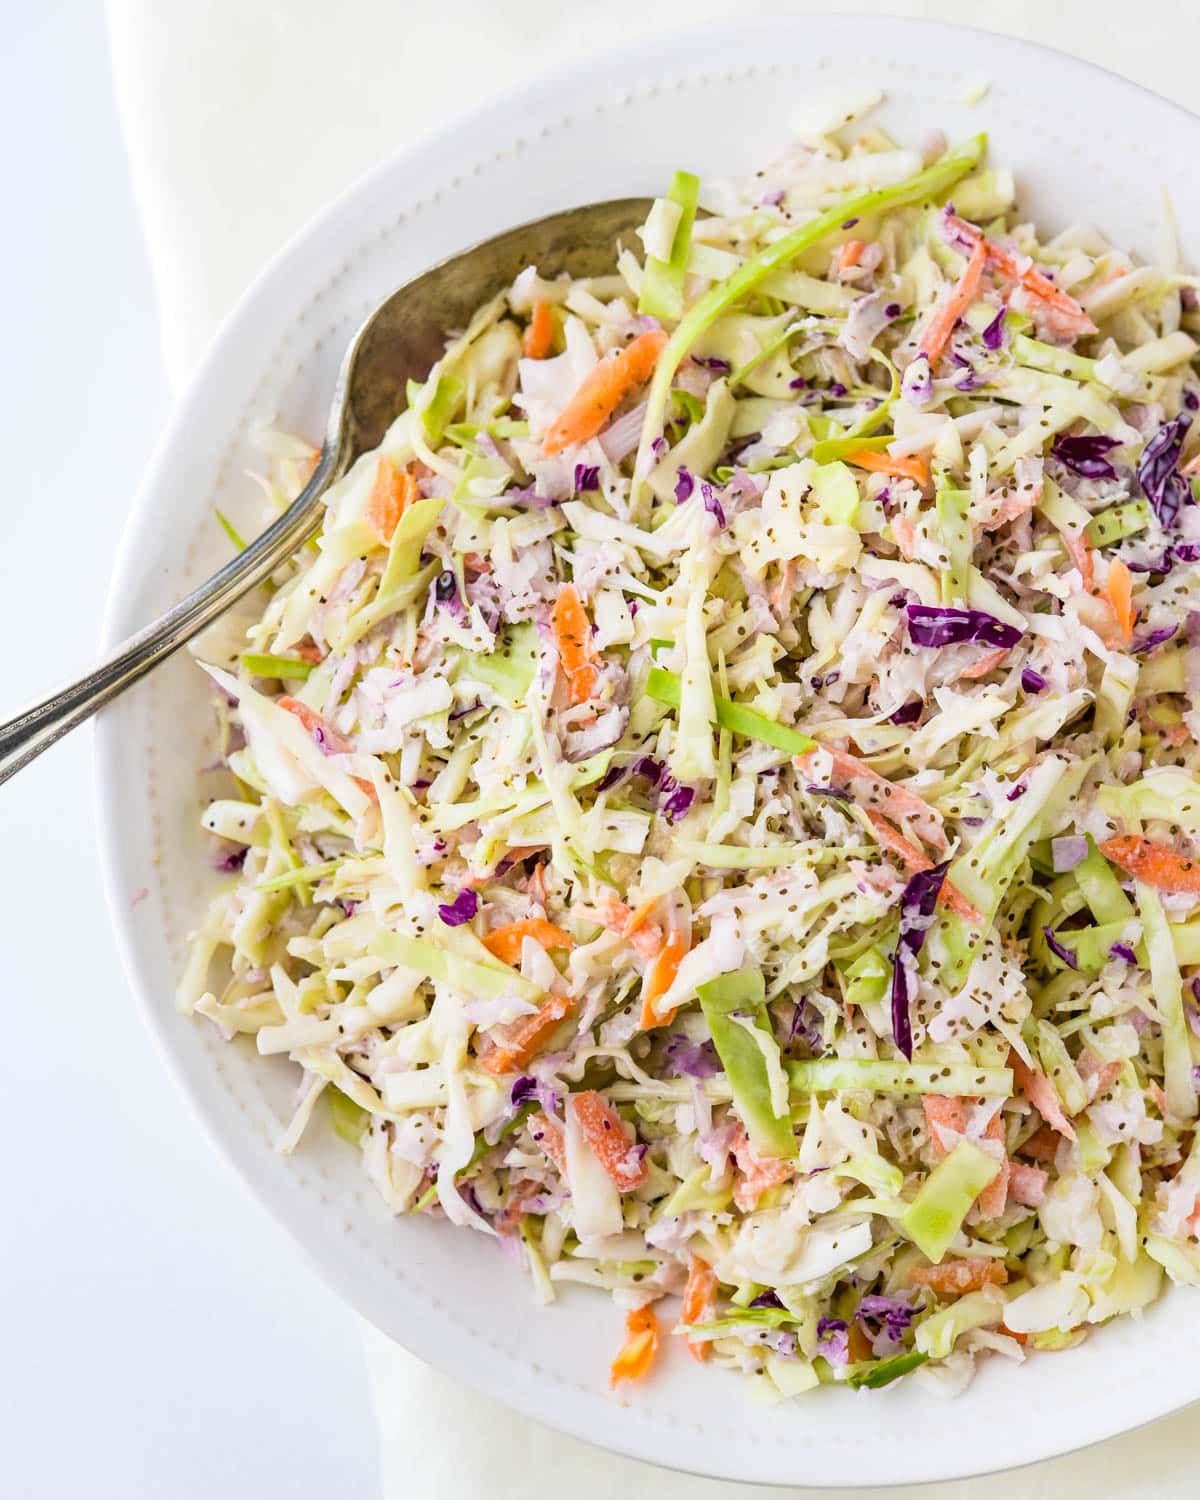 Serving coleslaw in a white serving bowl.